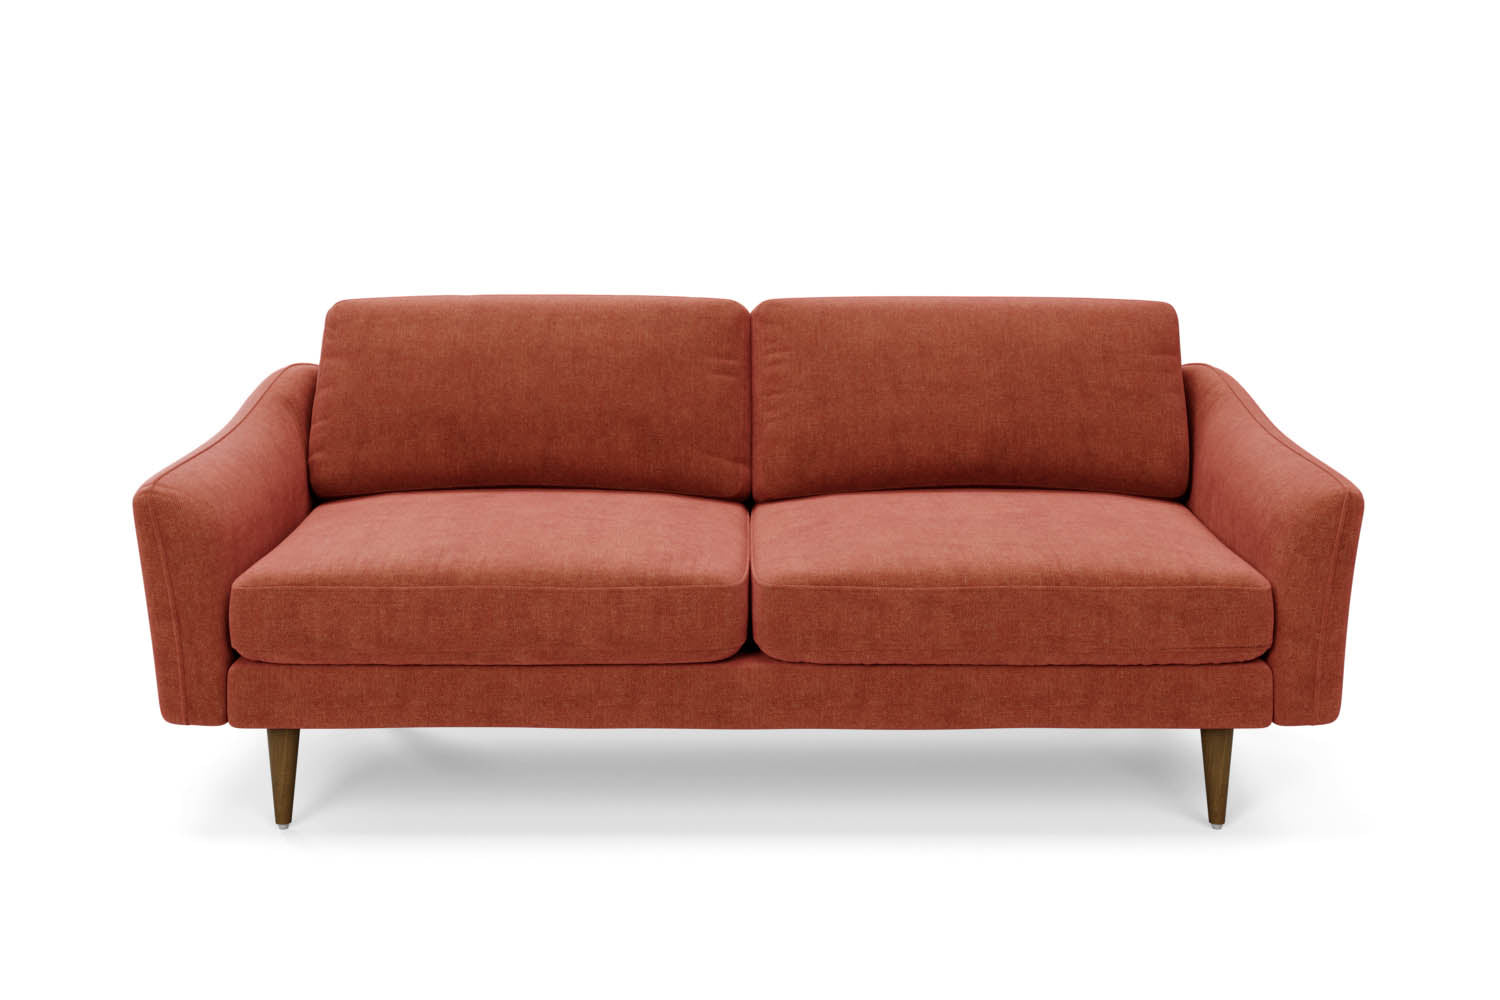 The Rebel 3 Seater Sofa in Spice with brown legs front variant_40886277505072